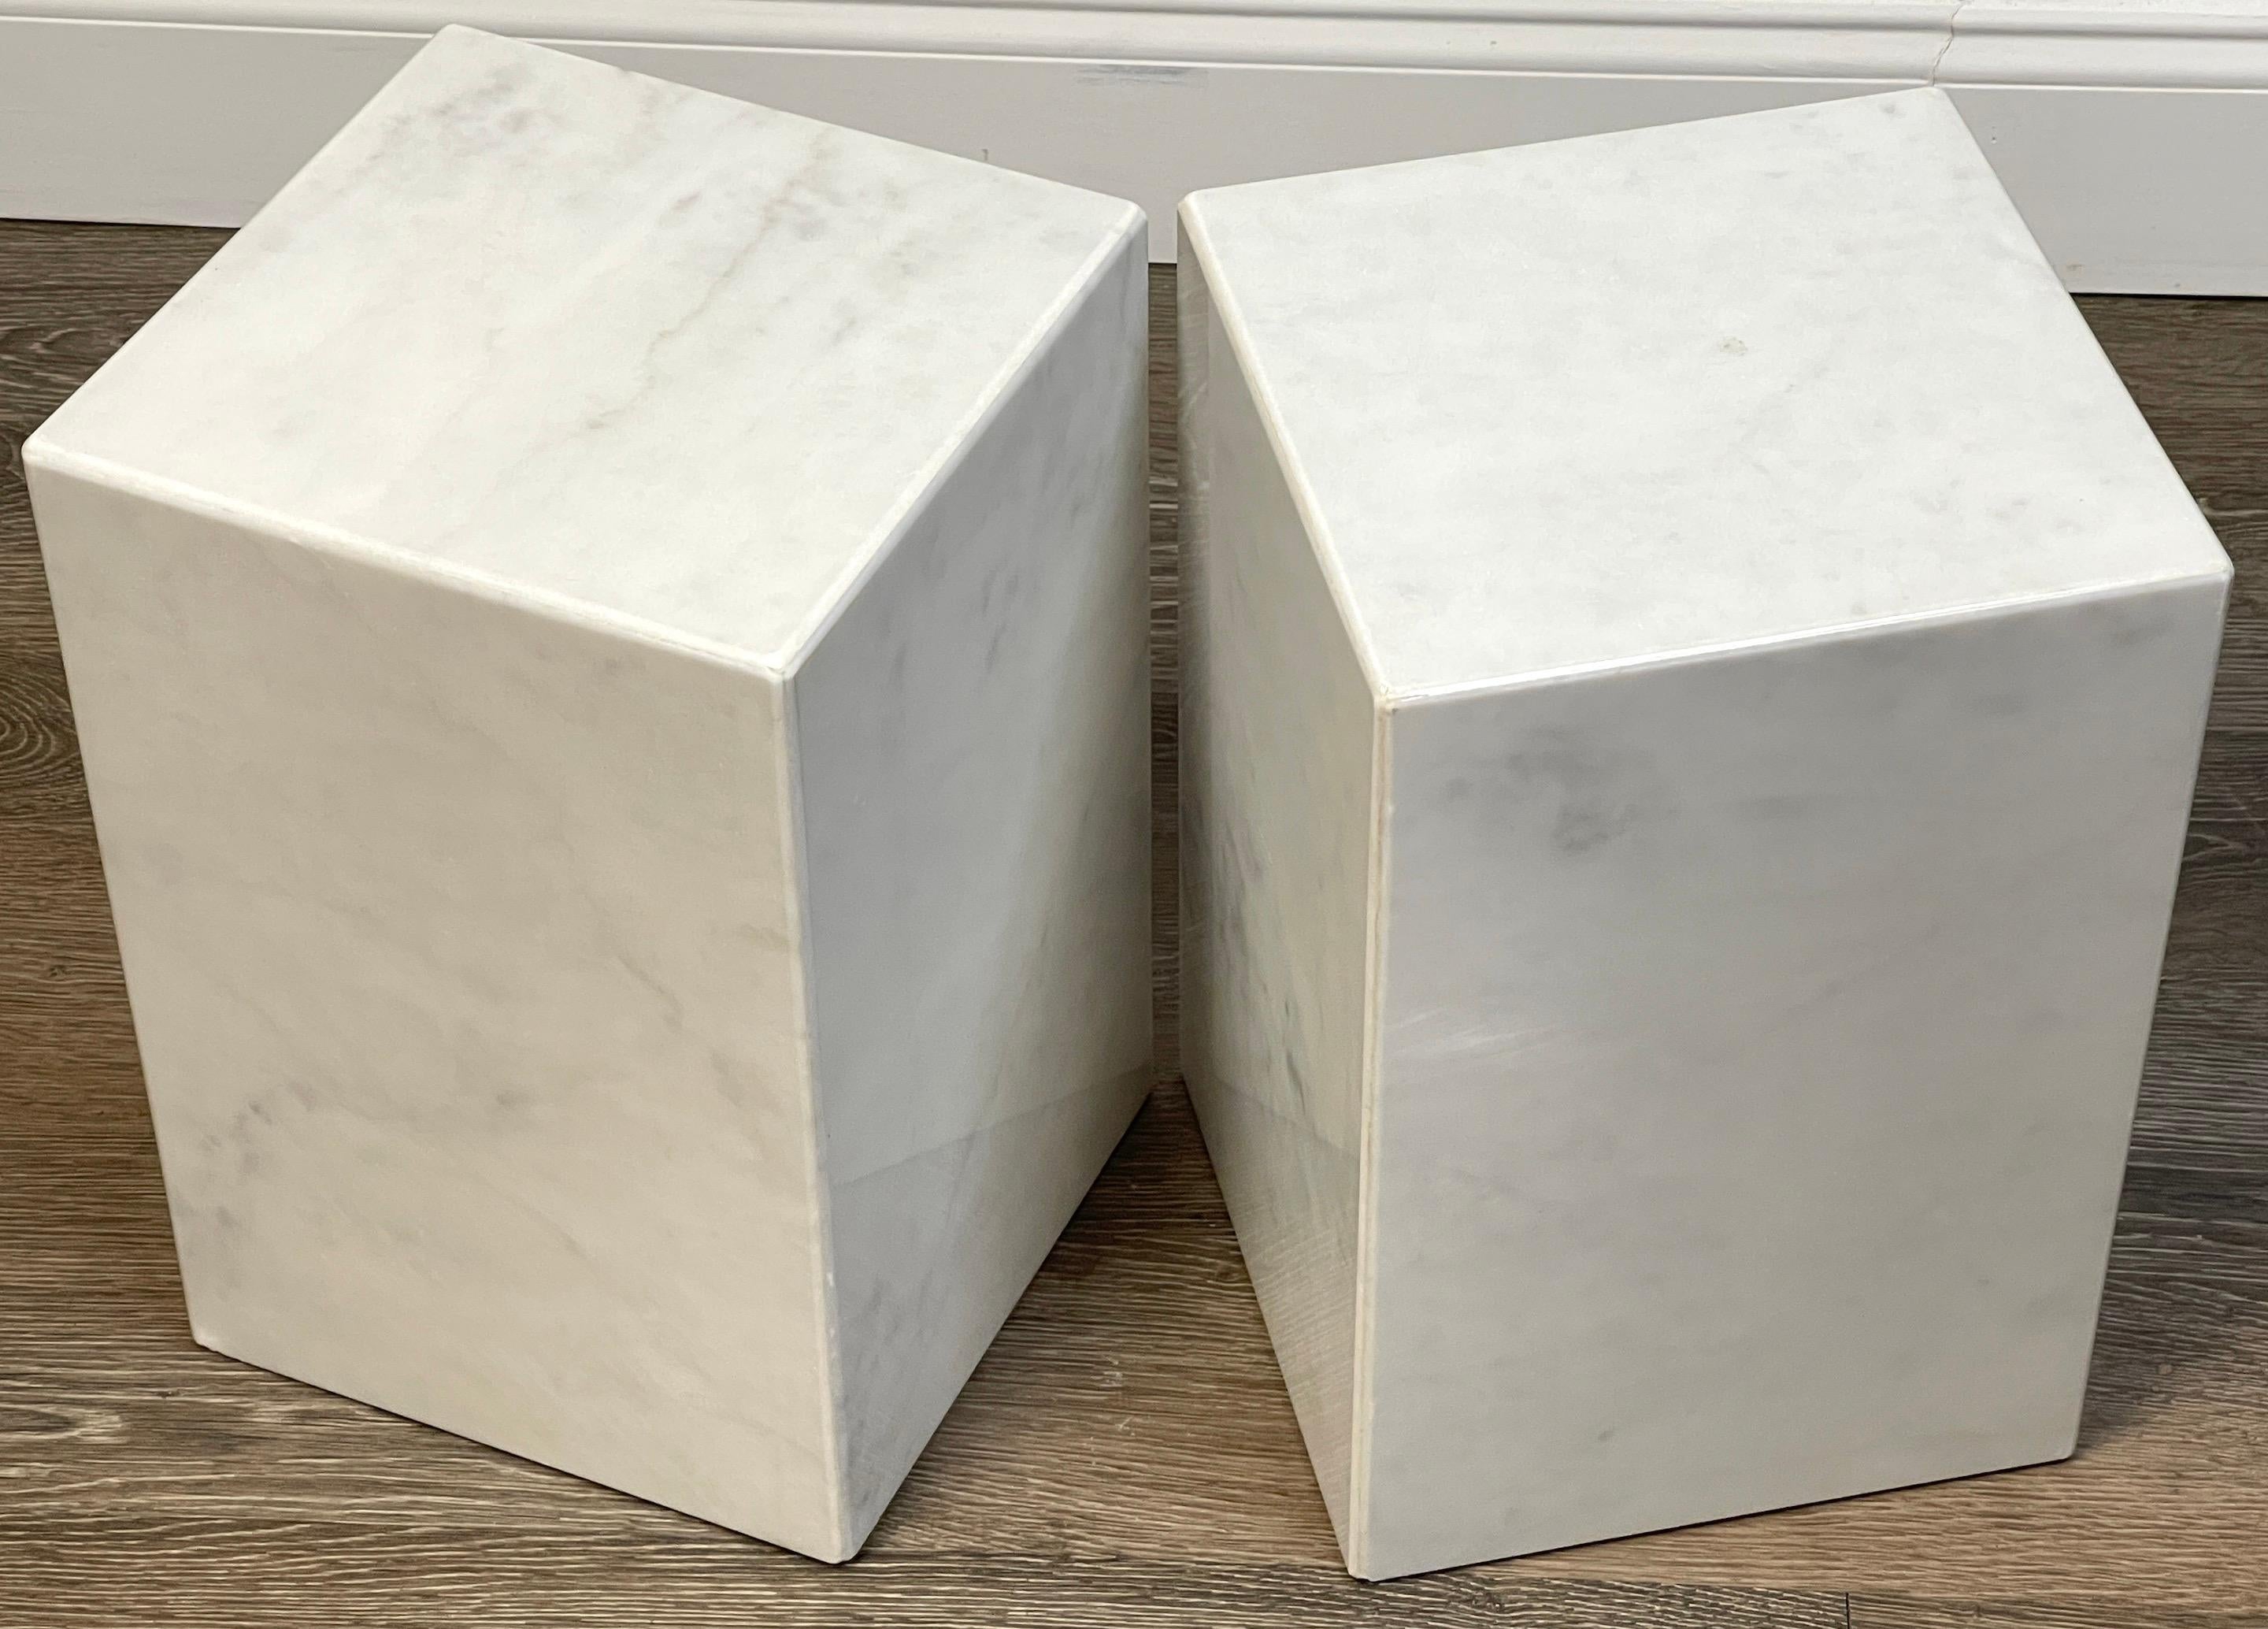 Pair of Italian Modern Carrera Marble Monolith side tables
 Each one with book-matched Carrera marble joined with seamless polished edges. Hollow construction. 
Each table stands 15-Inches high with a 10-Inch square diameter.